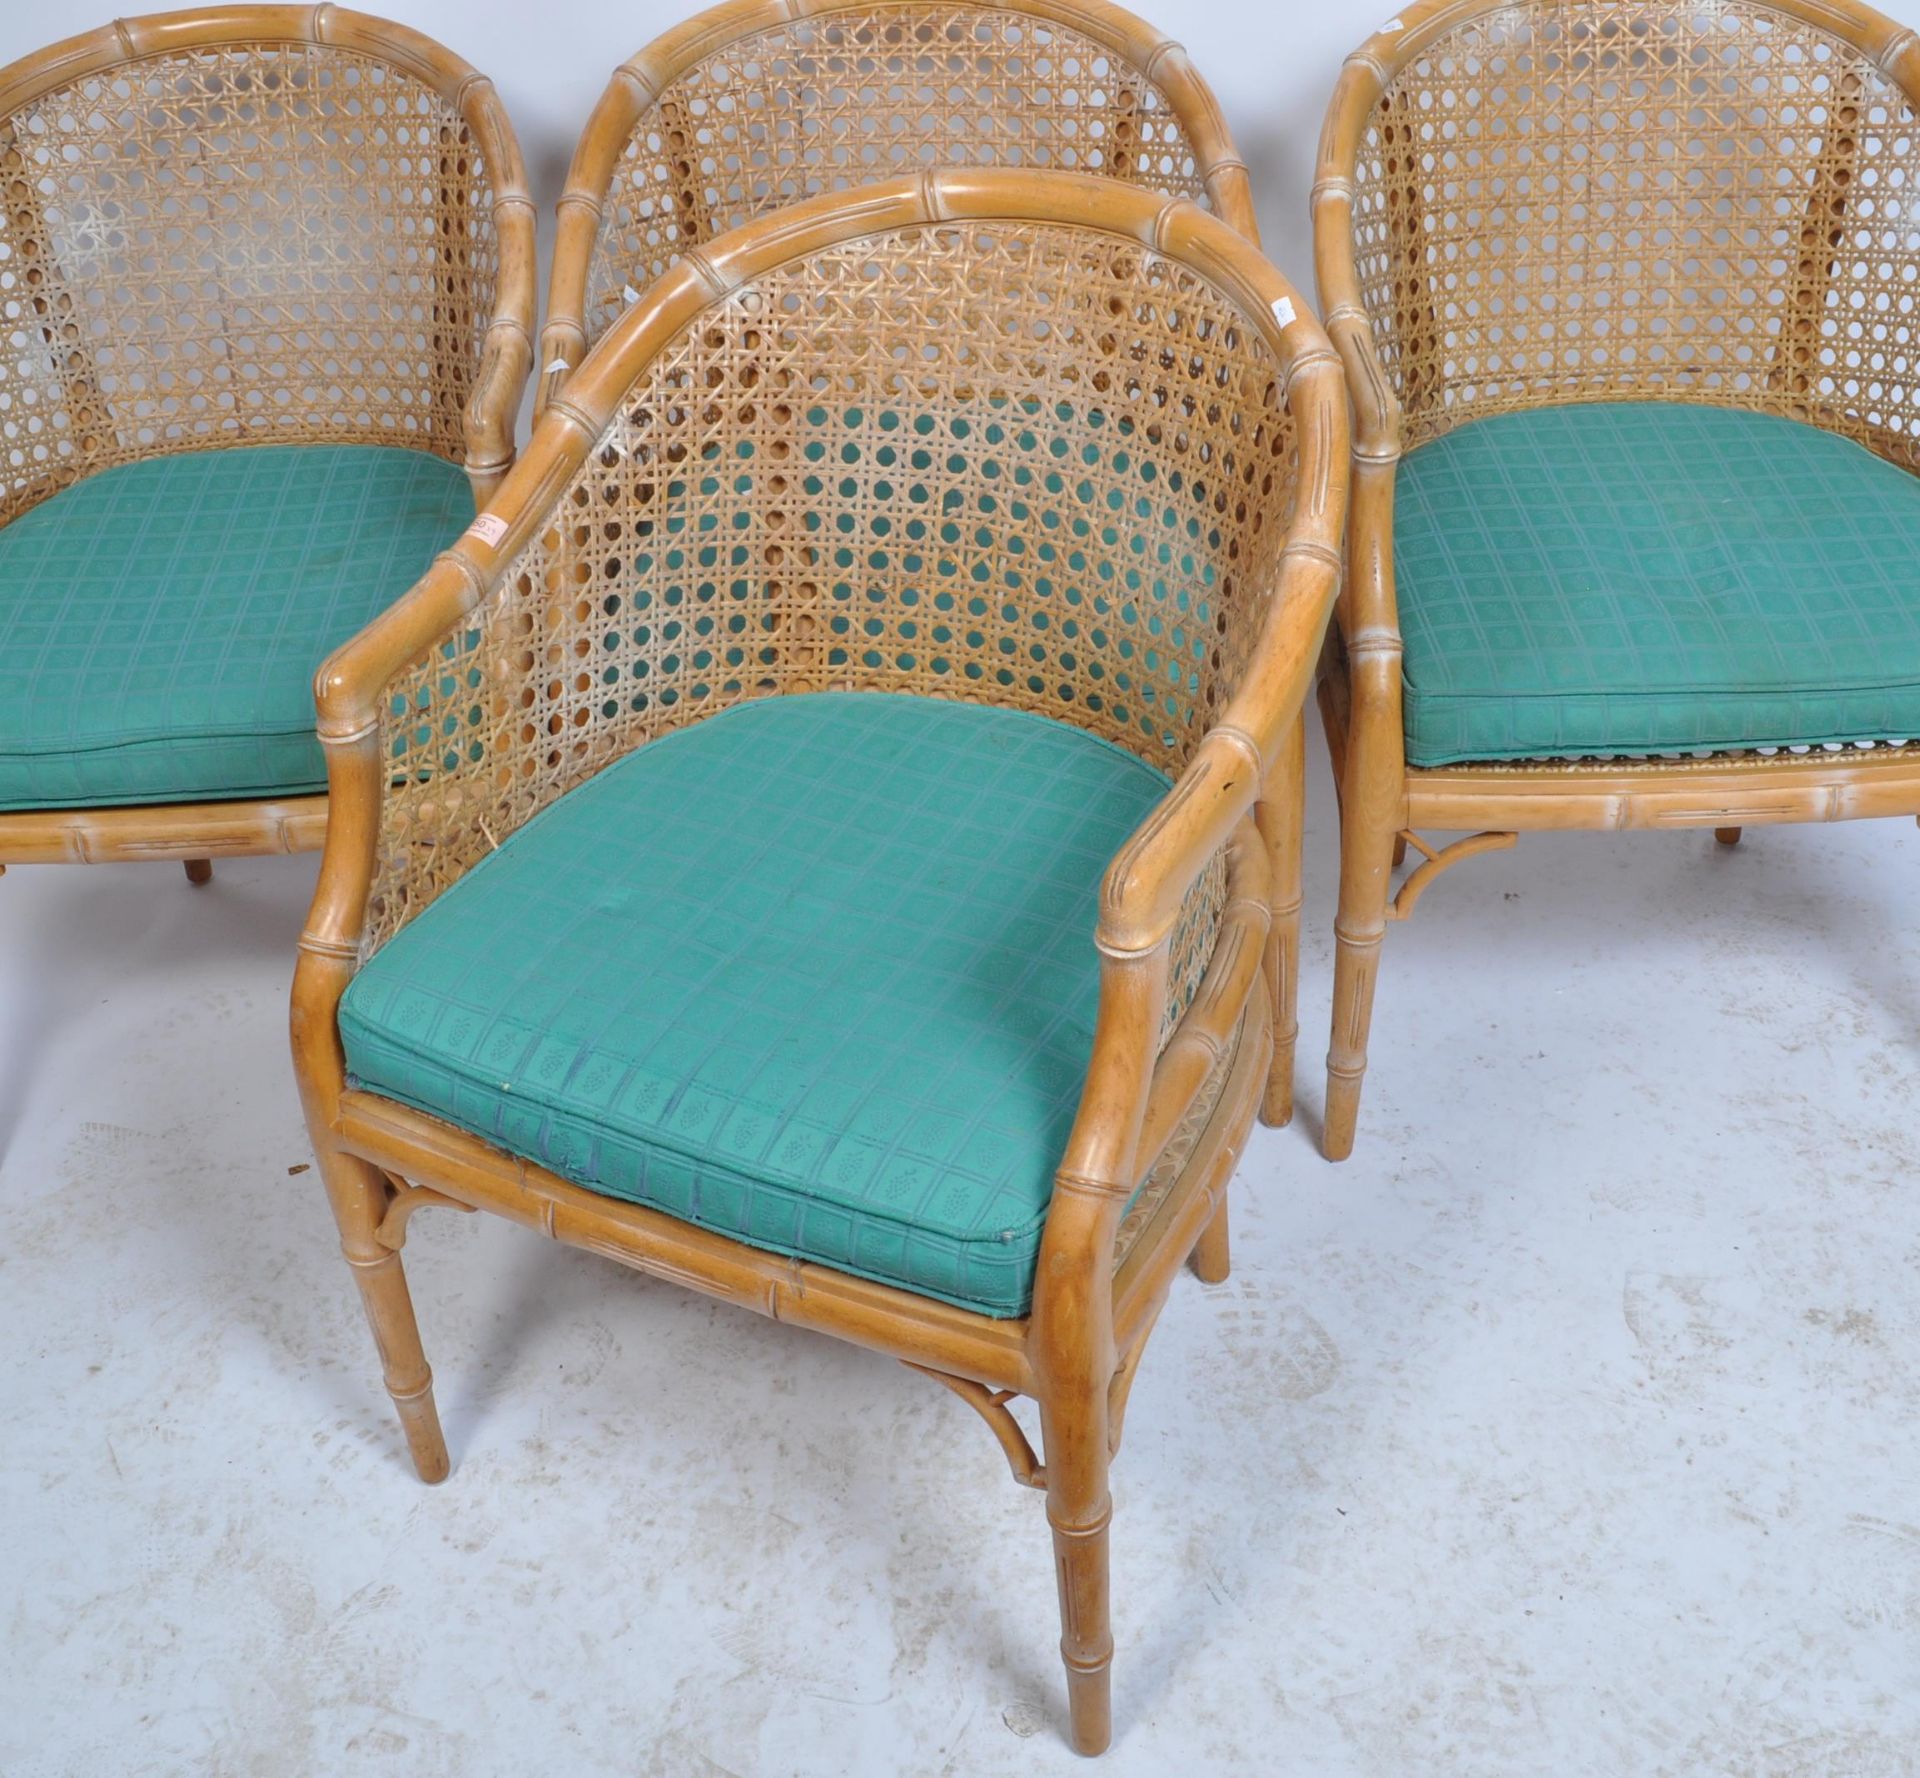 GIORGETTI MANNER RETRO VINTAGE CIRCA 1970S BAMBOO DINING CHAIRS - Image 2 of 5